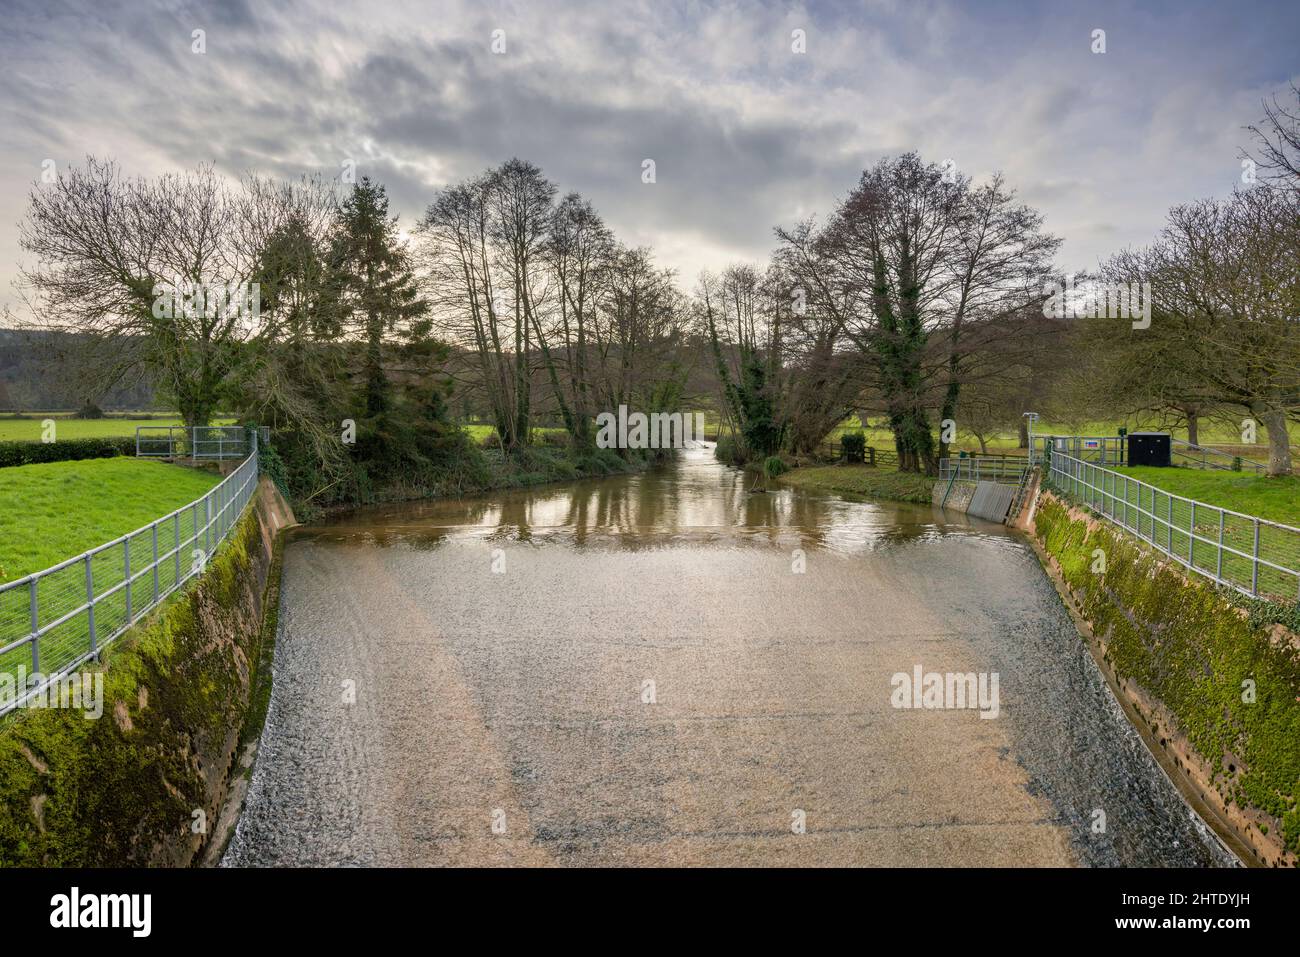 The River Avill Flood Channel from Loxhole Bridge at Dunster, Somerset ...